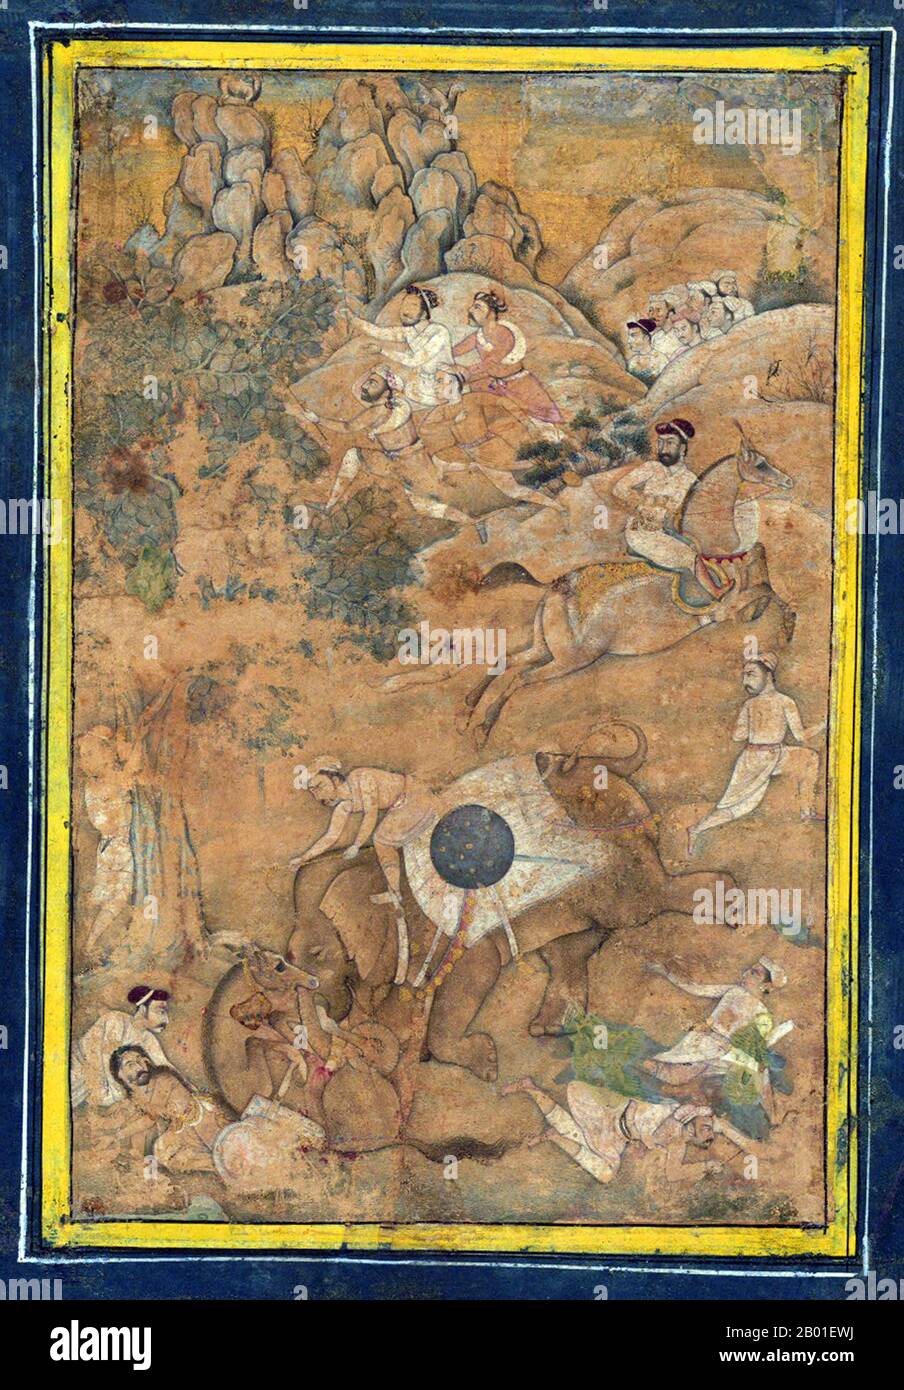 India: Emperor Akbar (25 October 1542 - 27 October 1605) controlling an elephant in musth during a hunt. Leaf, c. early 17th century.  Akbar (r. 1556-1605), also known as Shahanshah Akbar-e-Azam or Akbar the Great, was the third Mughal Emperor. He was of Timurid descent; the son of Emperor Humayun, and the grandson of  Emperor Babur, the ruler who founded the Mughal dynasty in India. At the end of his reign in 1605 the Mughal empire covered most of the northern and central India.  Akbar was thirteen years old when he ascended the Mughal throne in Delhi (February 1556). Stock Photo